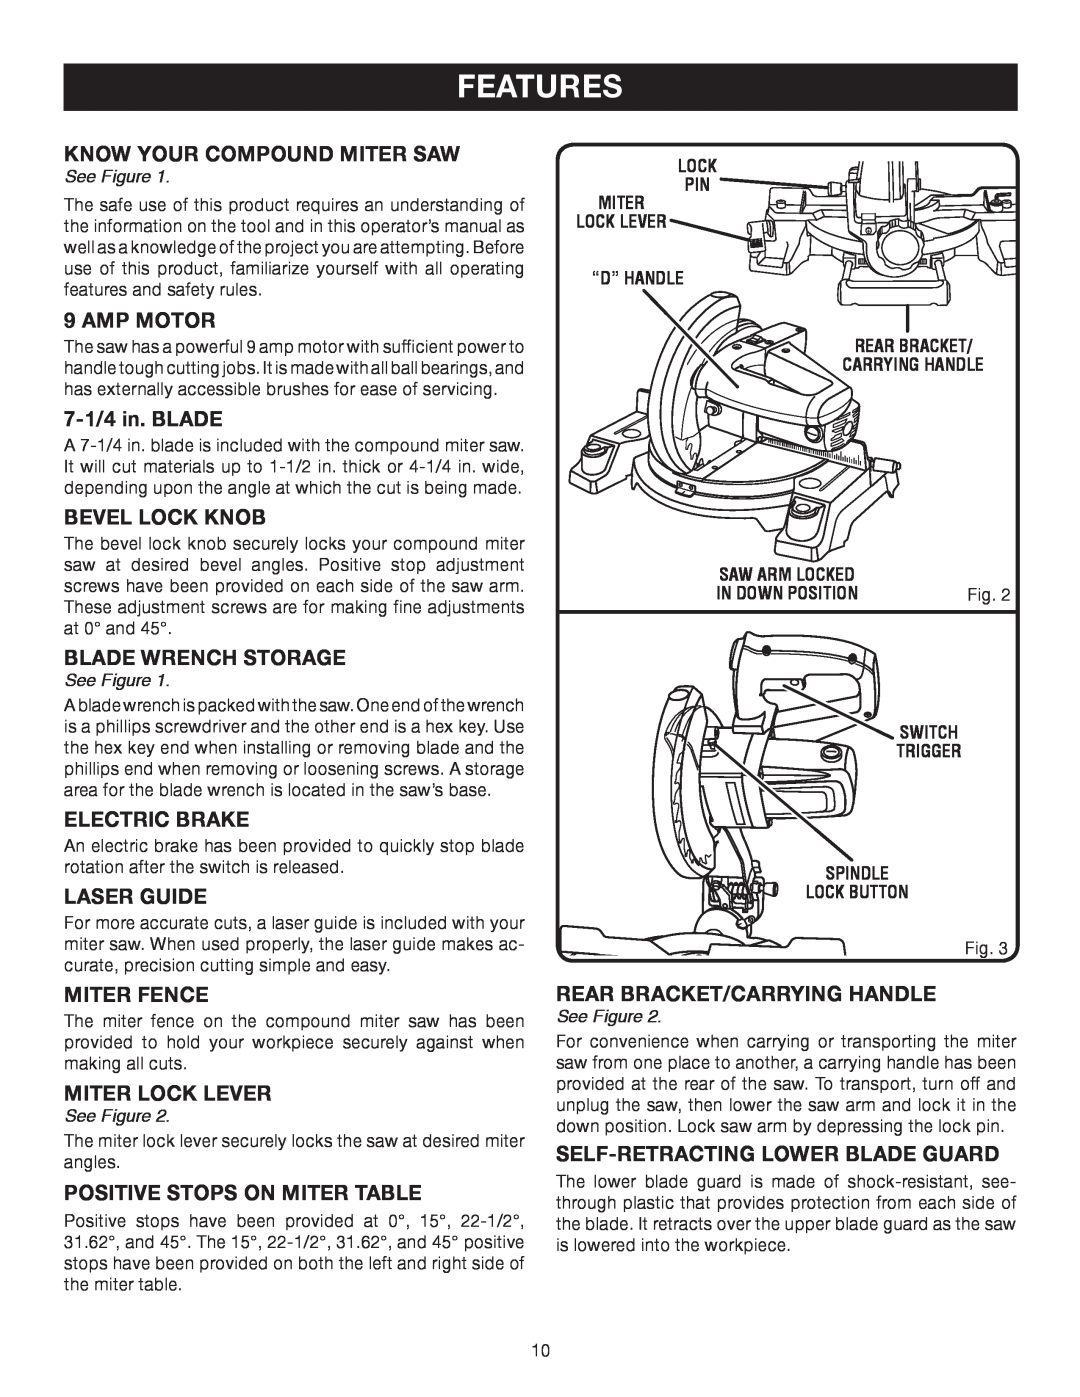 Ryobi TS1141 manual Features, Know Your Compound Miter Saw 